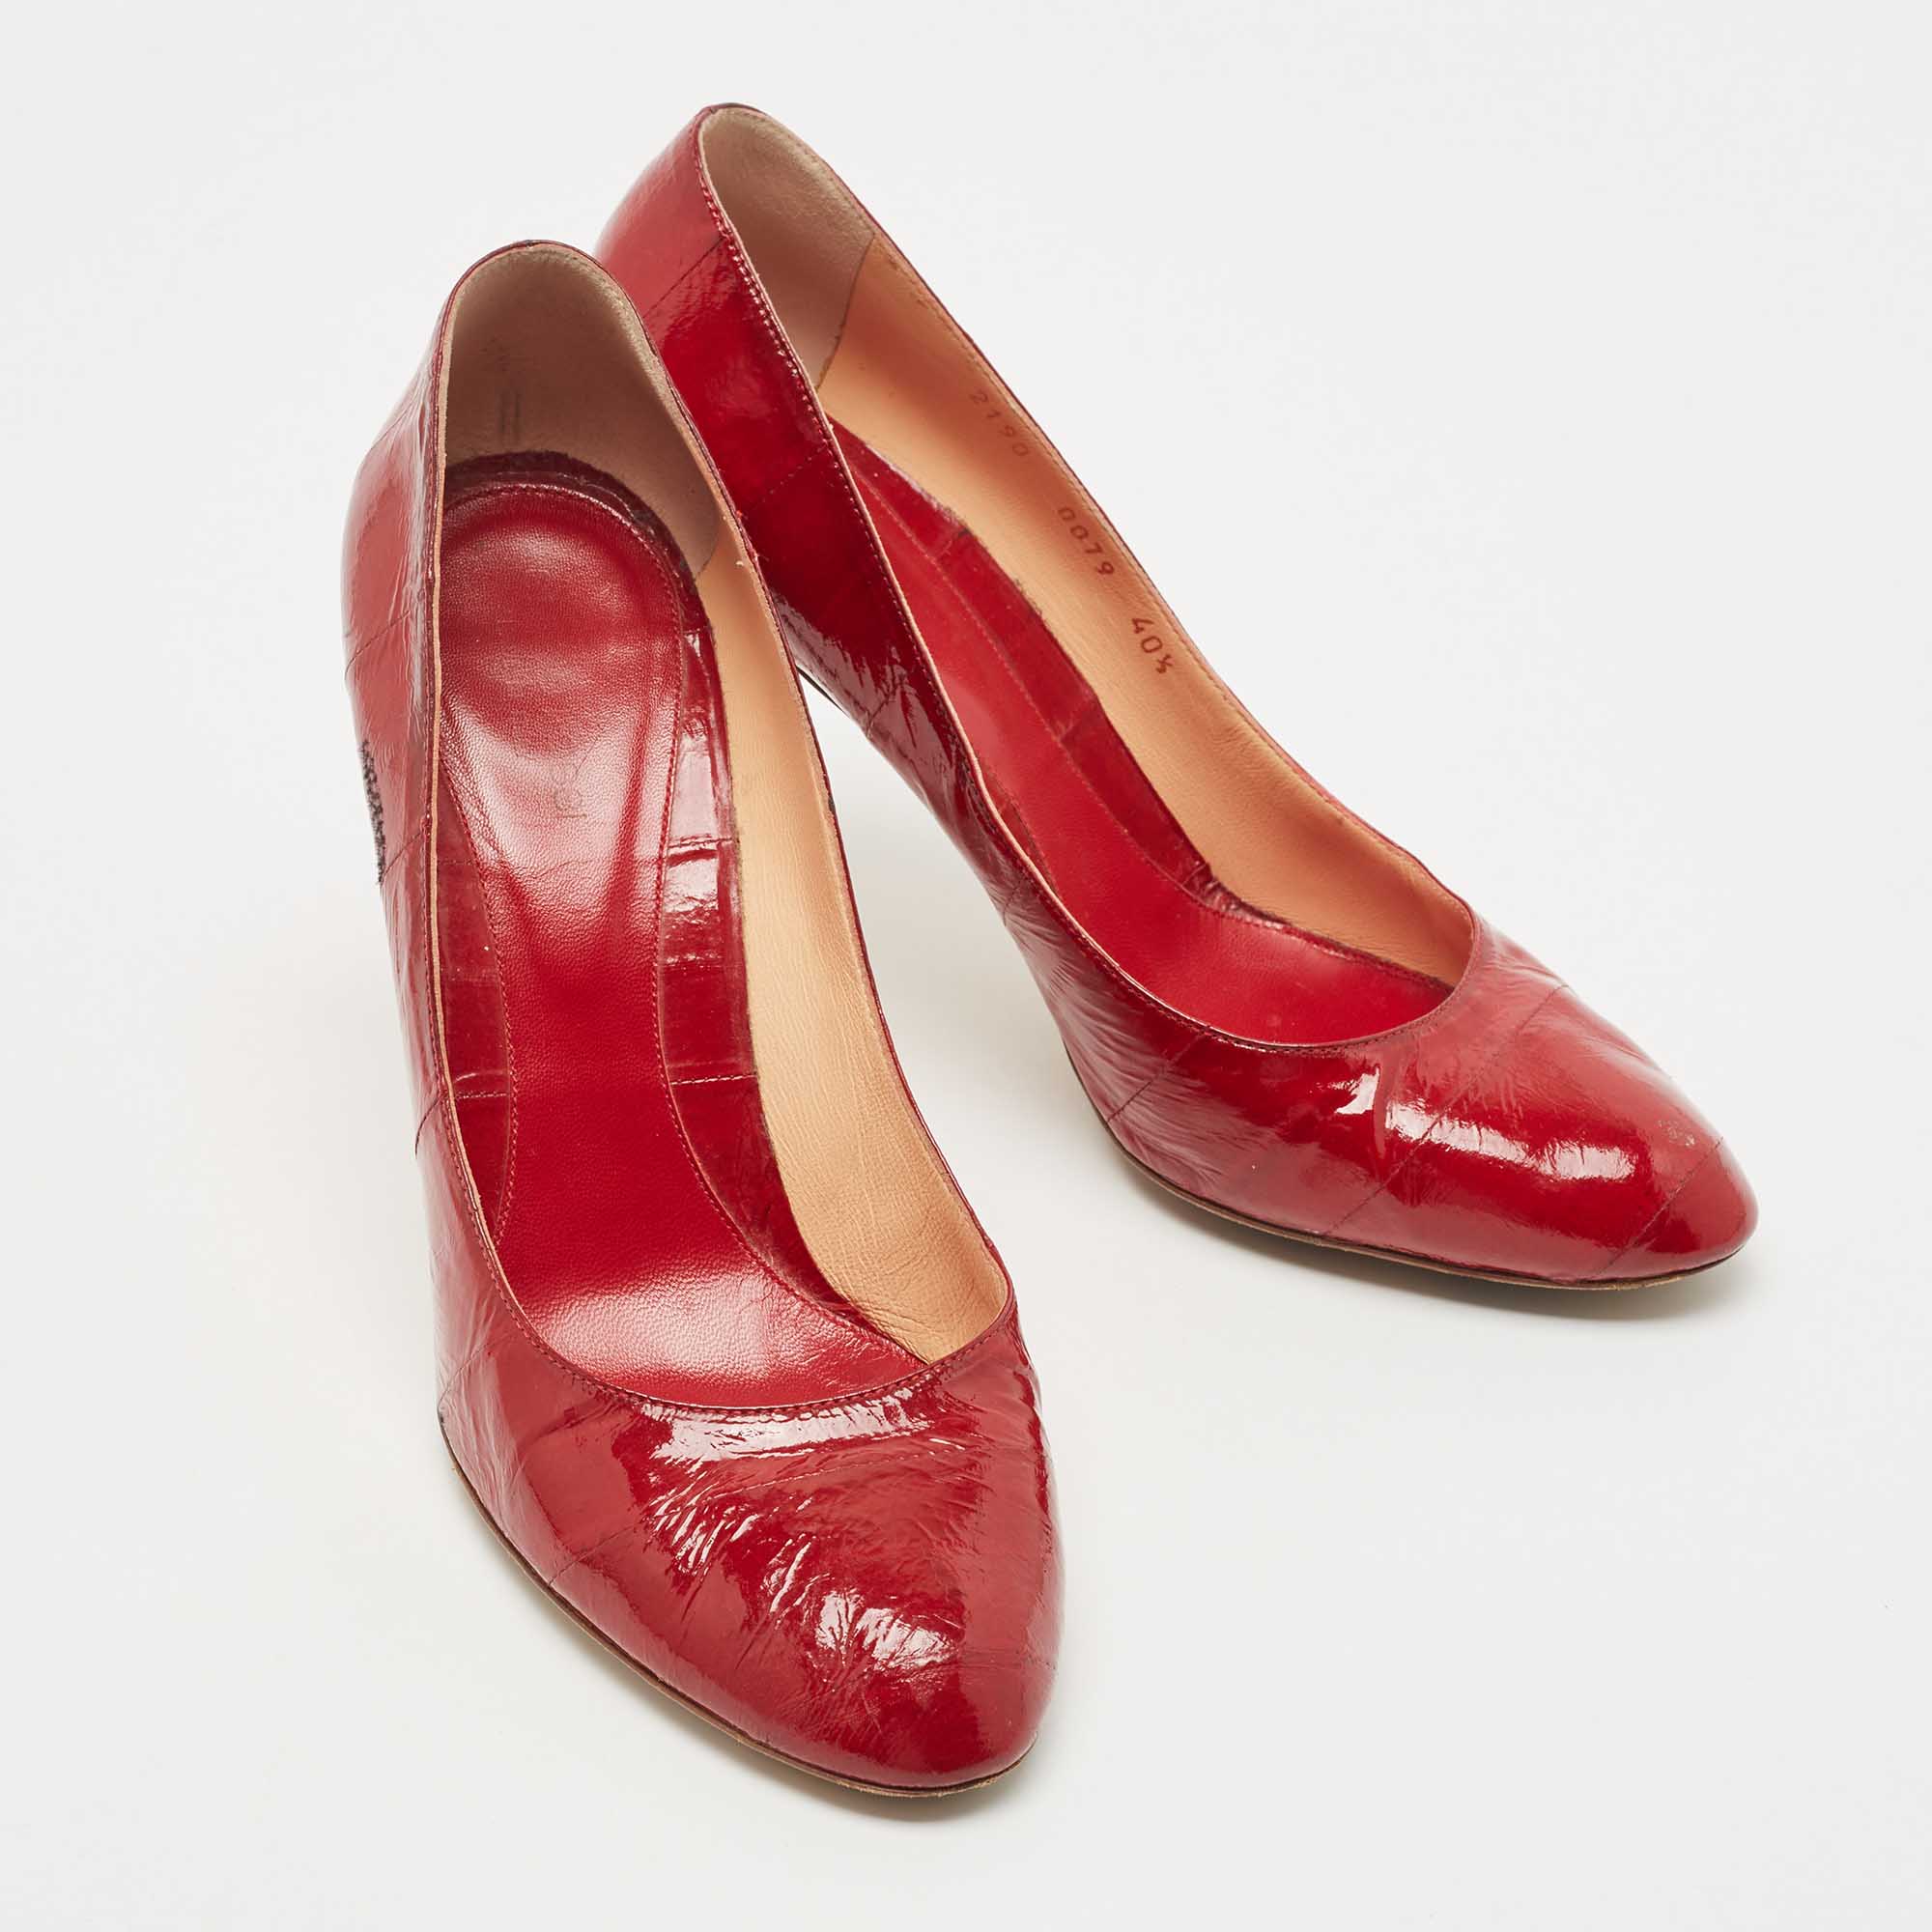 Sergio Rossi Dark Red Patent Eel Leather Round Toe Pumps Size 40.5